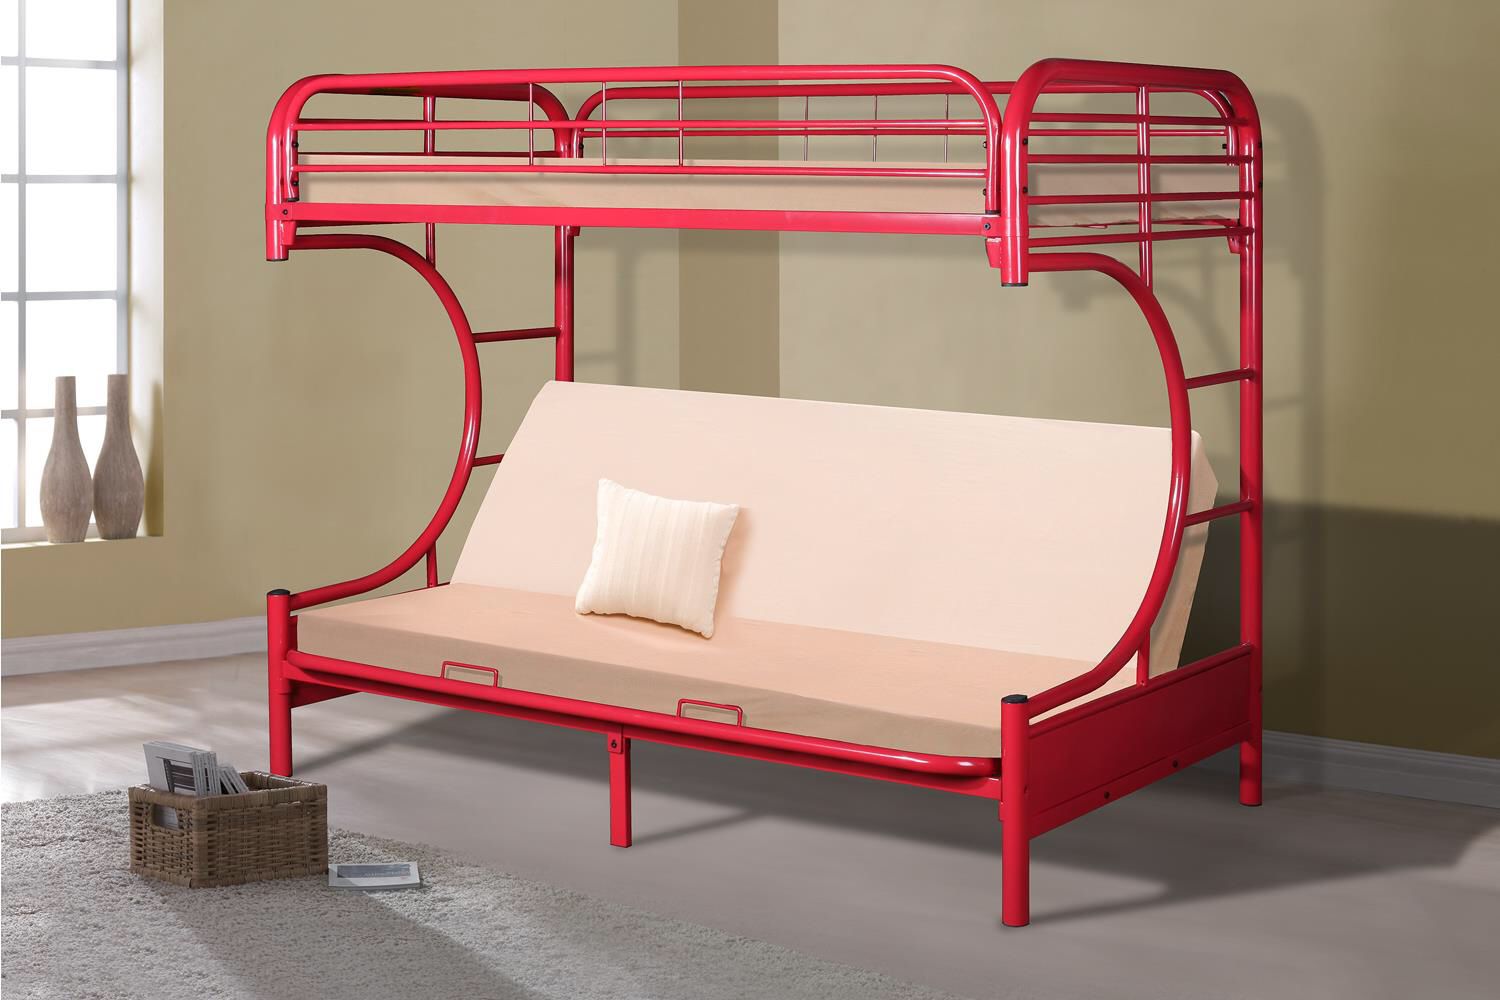 💥Furniture Sale!💥 Twin Red Futon Bunkbed Brand New In Box! $50 Down Takes It Home Today!